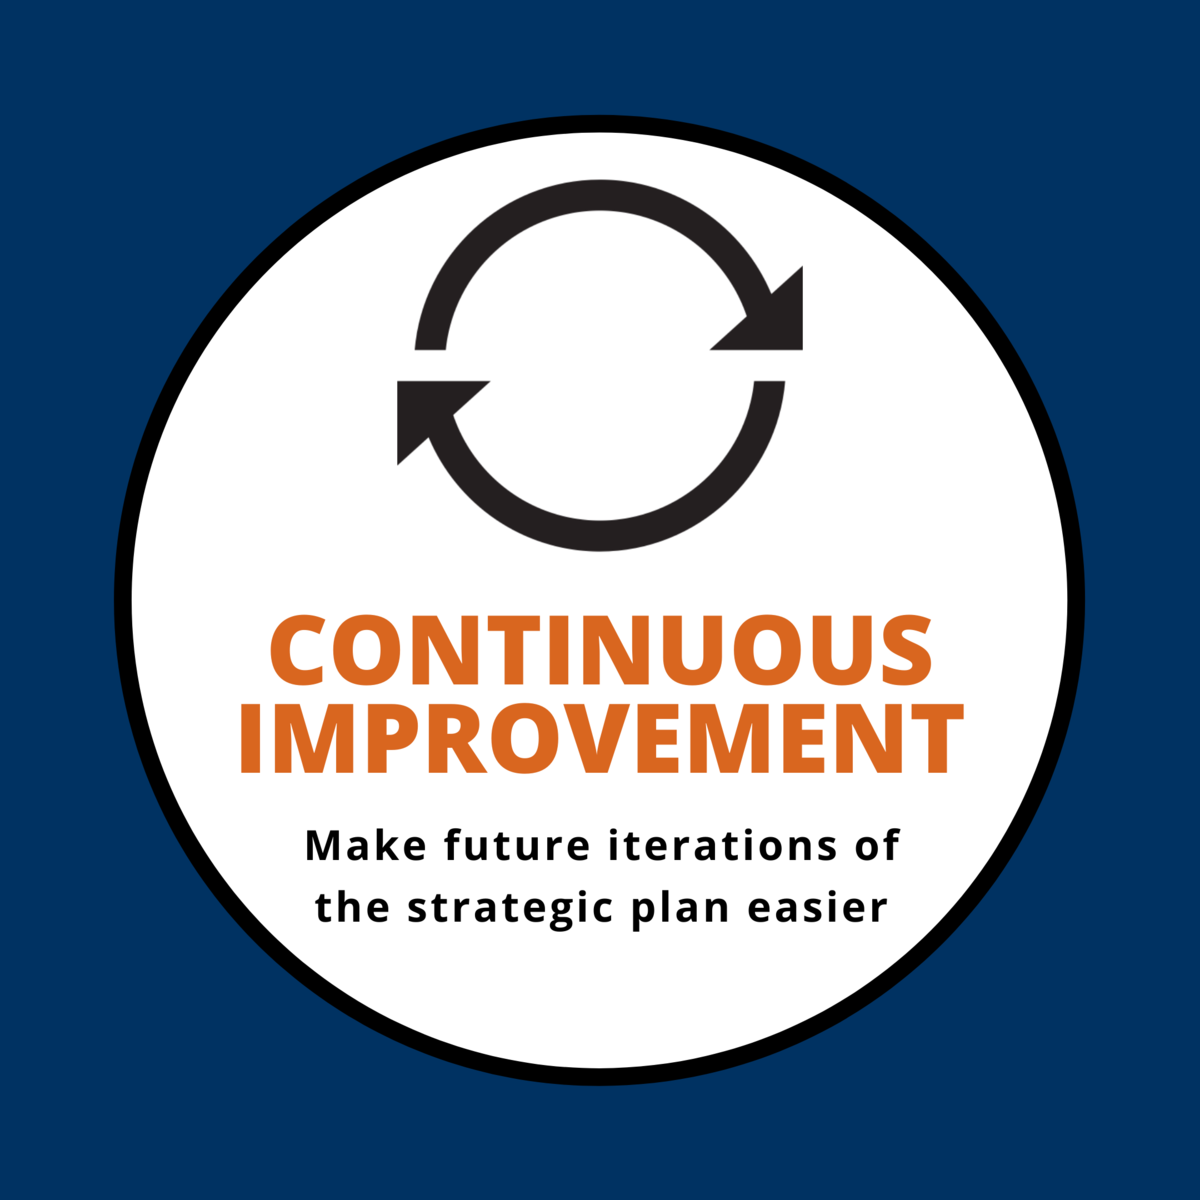 Continuous Improvement: Make future iterations of the strategic plan easier